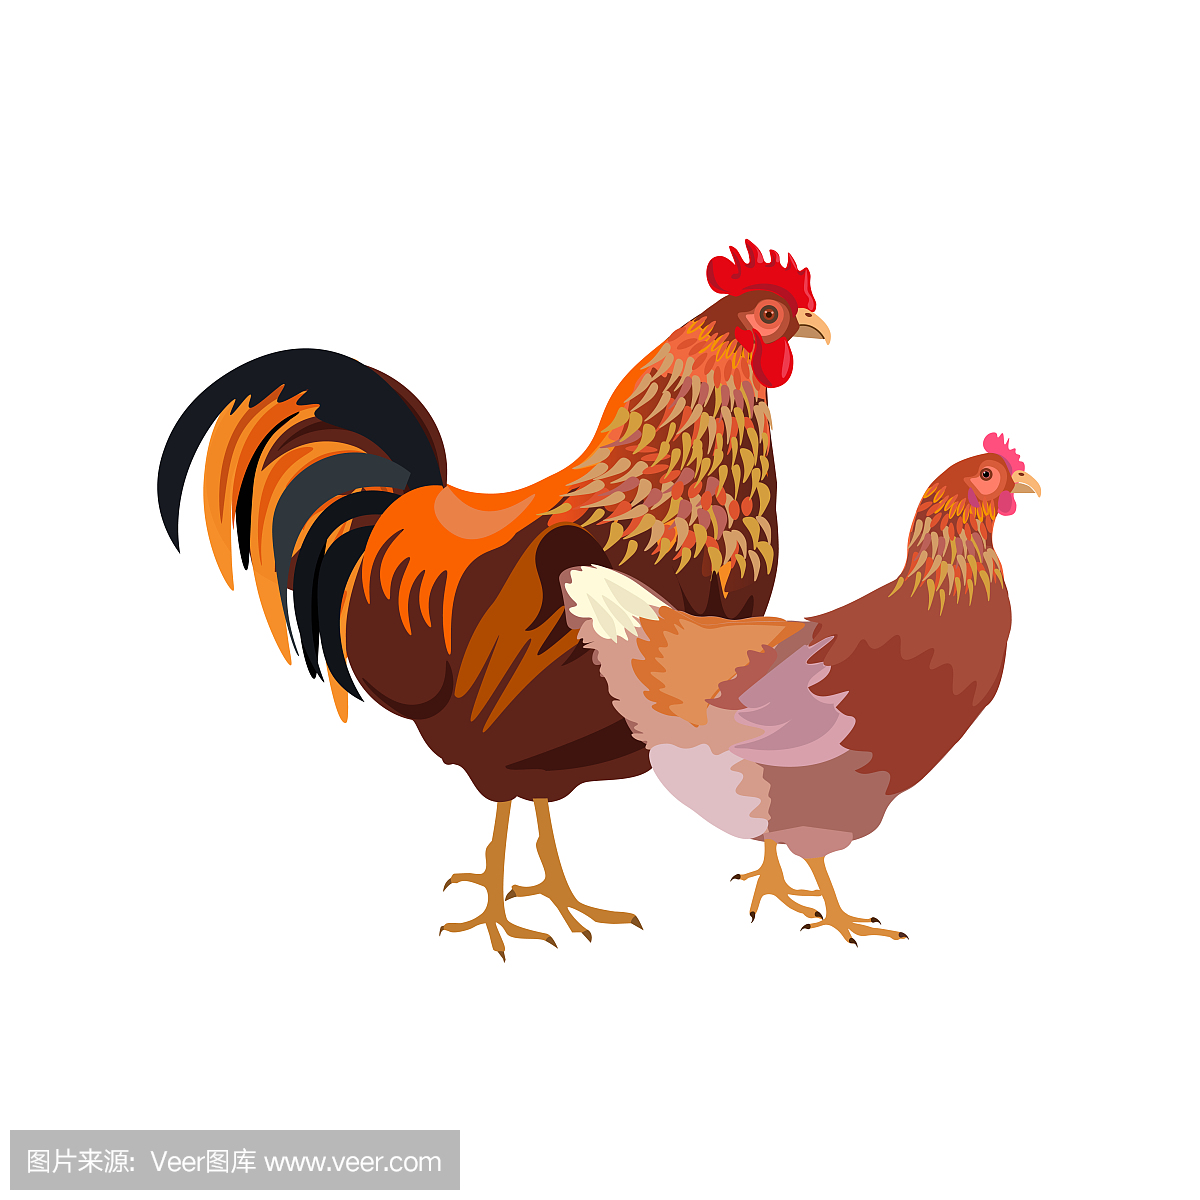 Rooster and hen couple